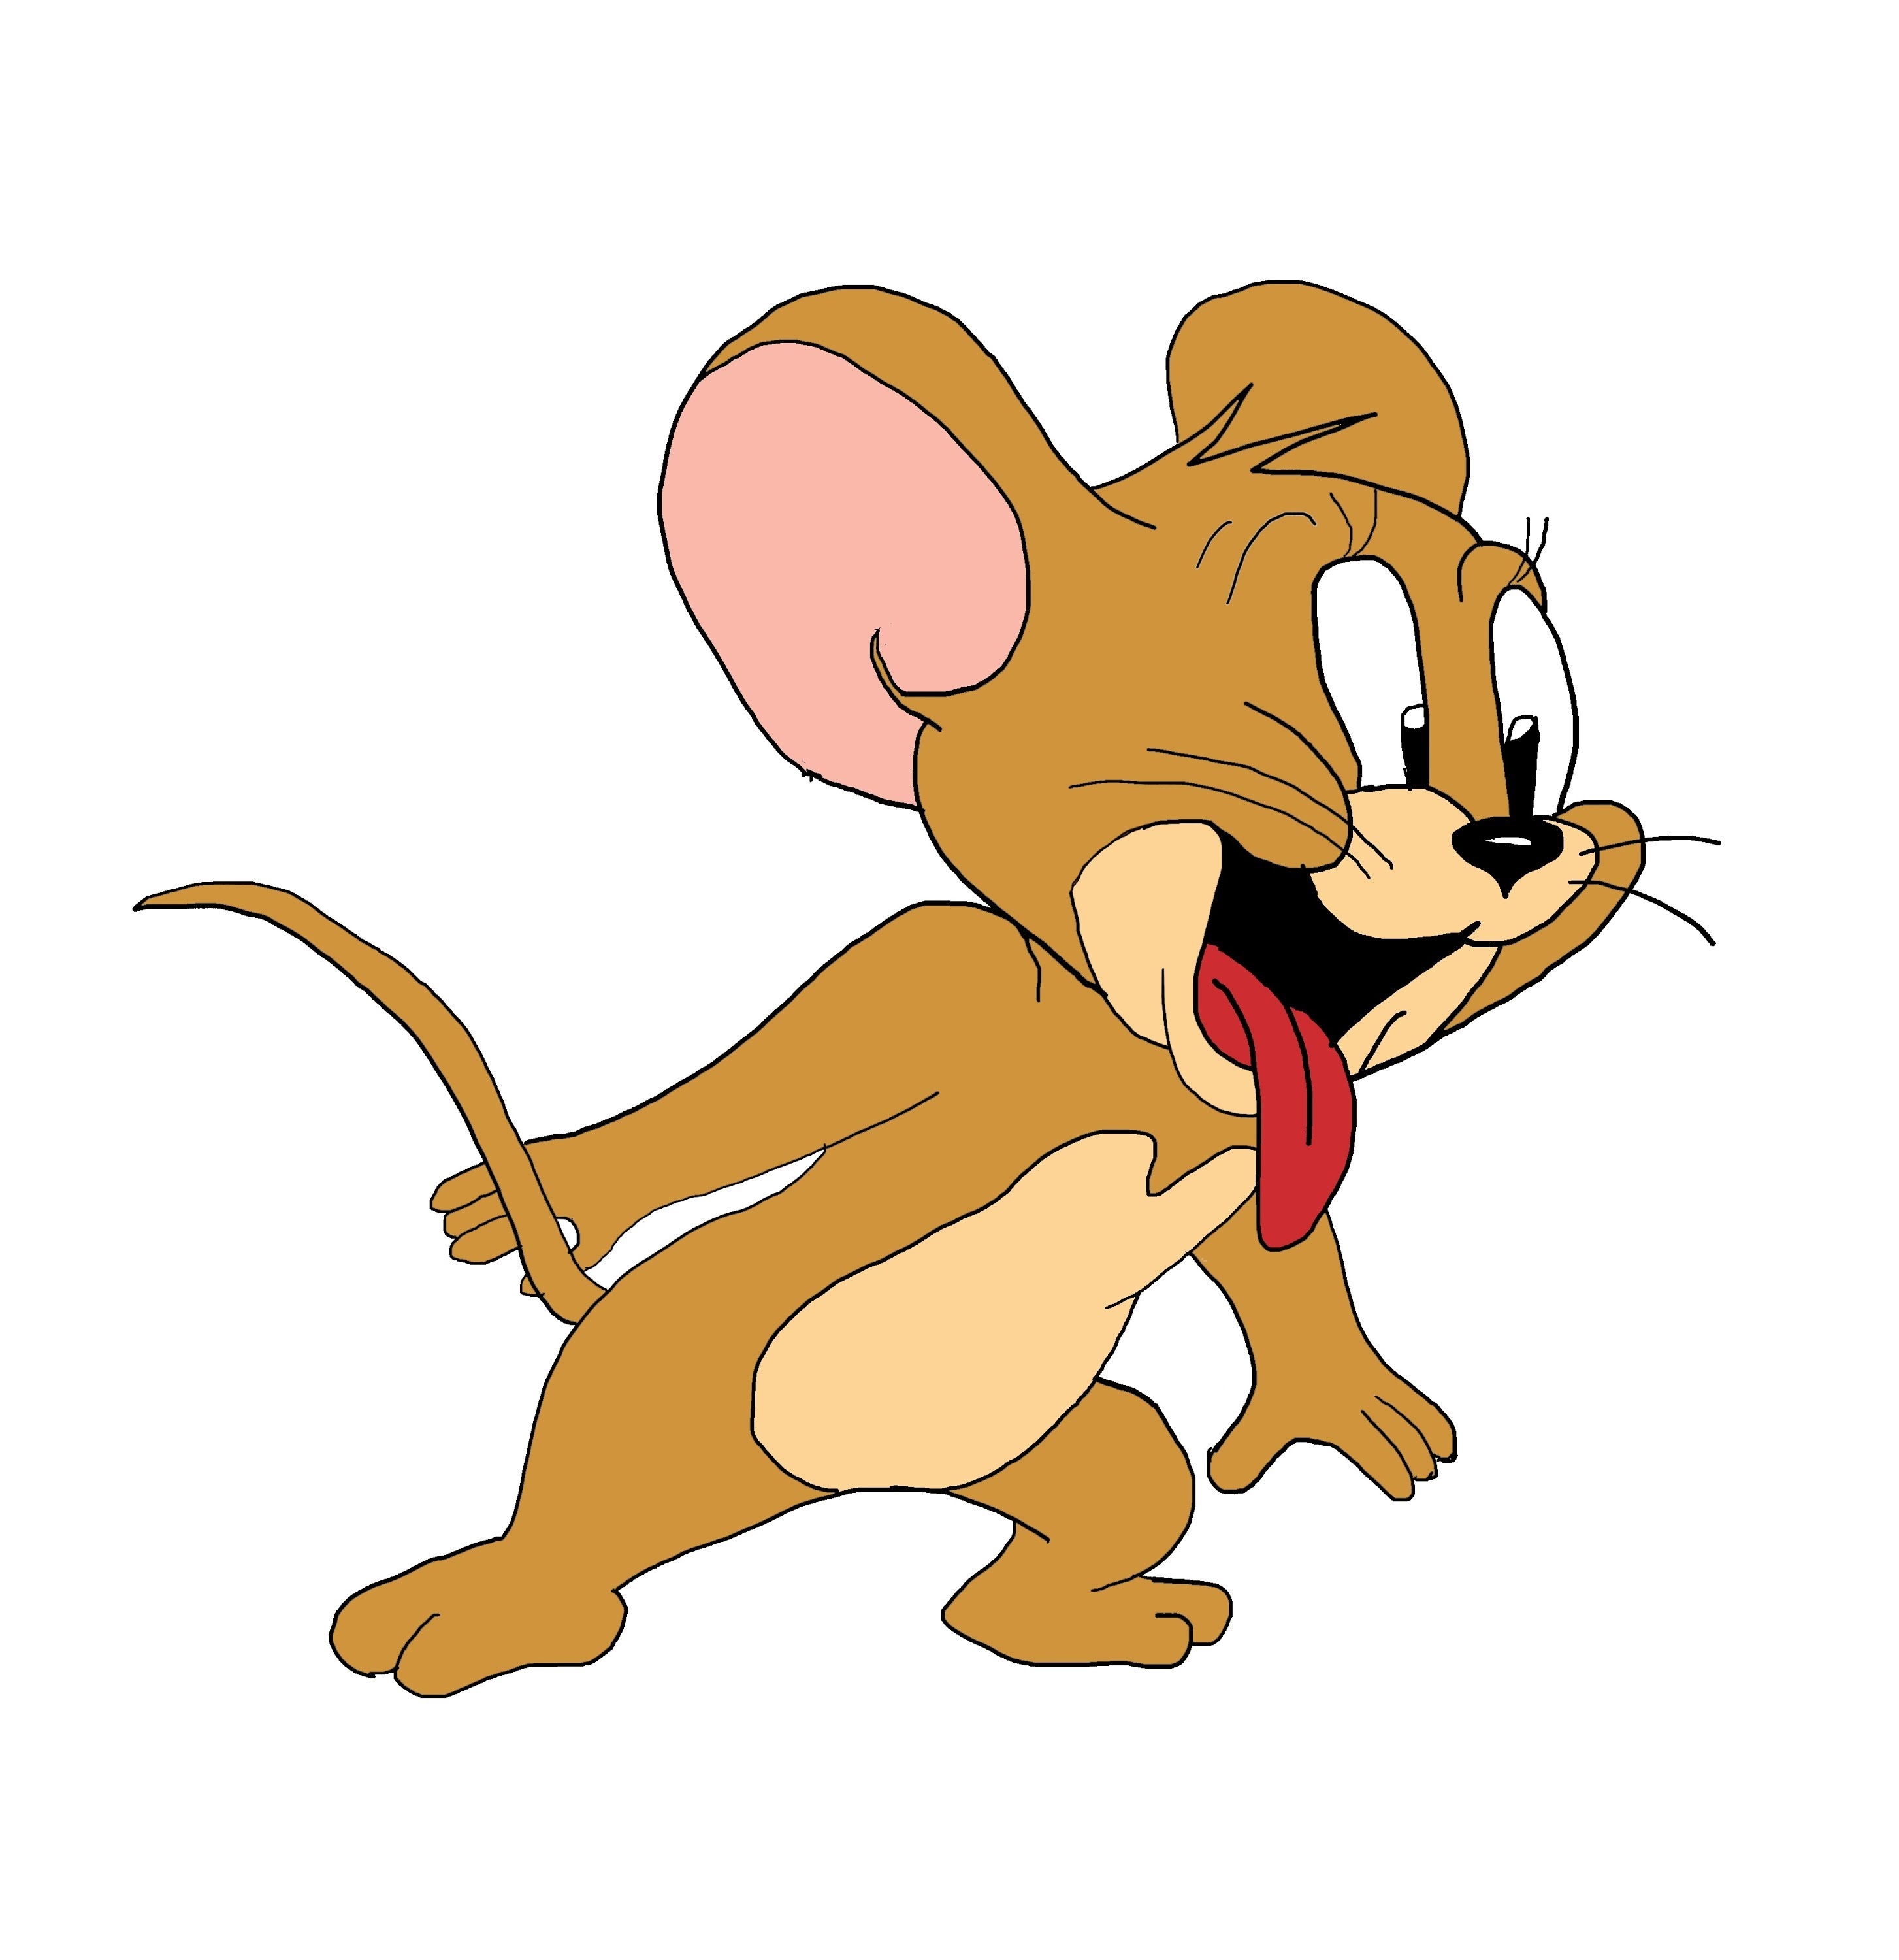 tom-and-jerry-mice-mouse-free-hd-wallpaper.jpg